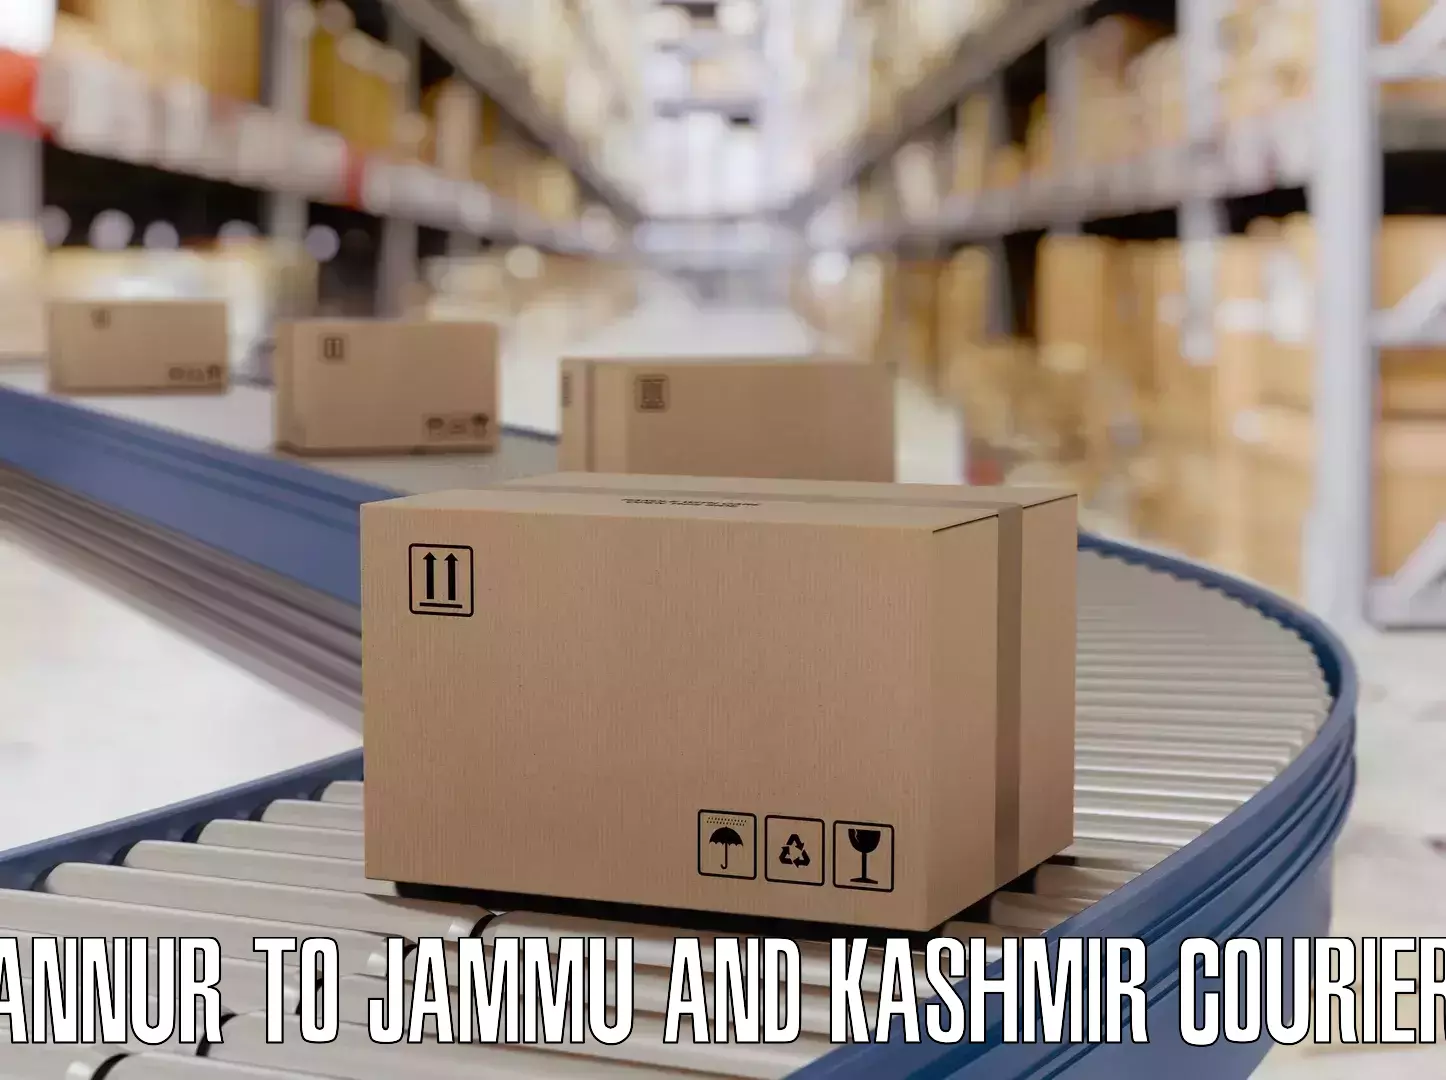 Baggage delivery technology in Annur to Jammu and Kashmir